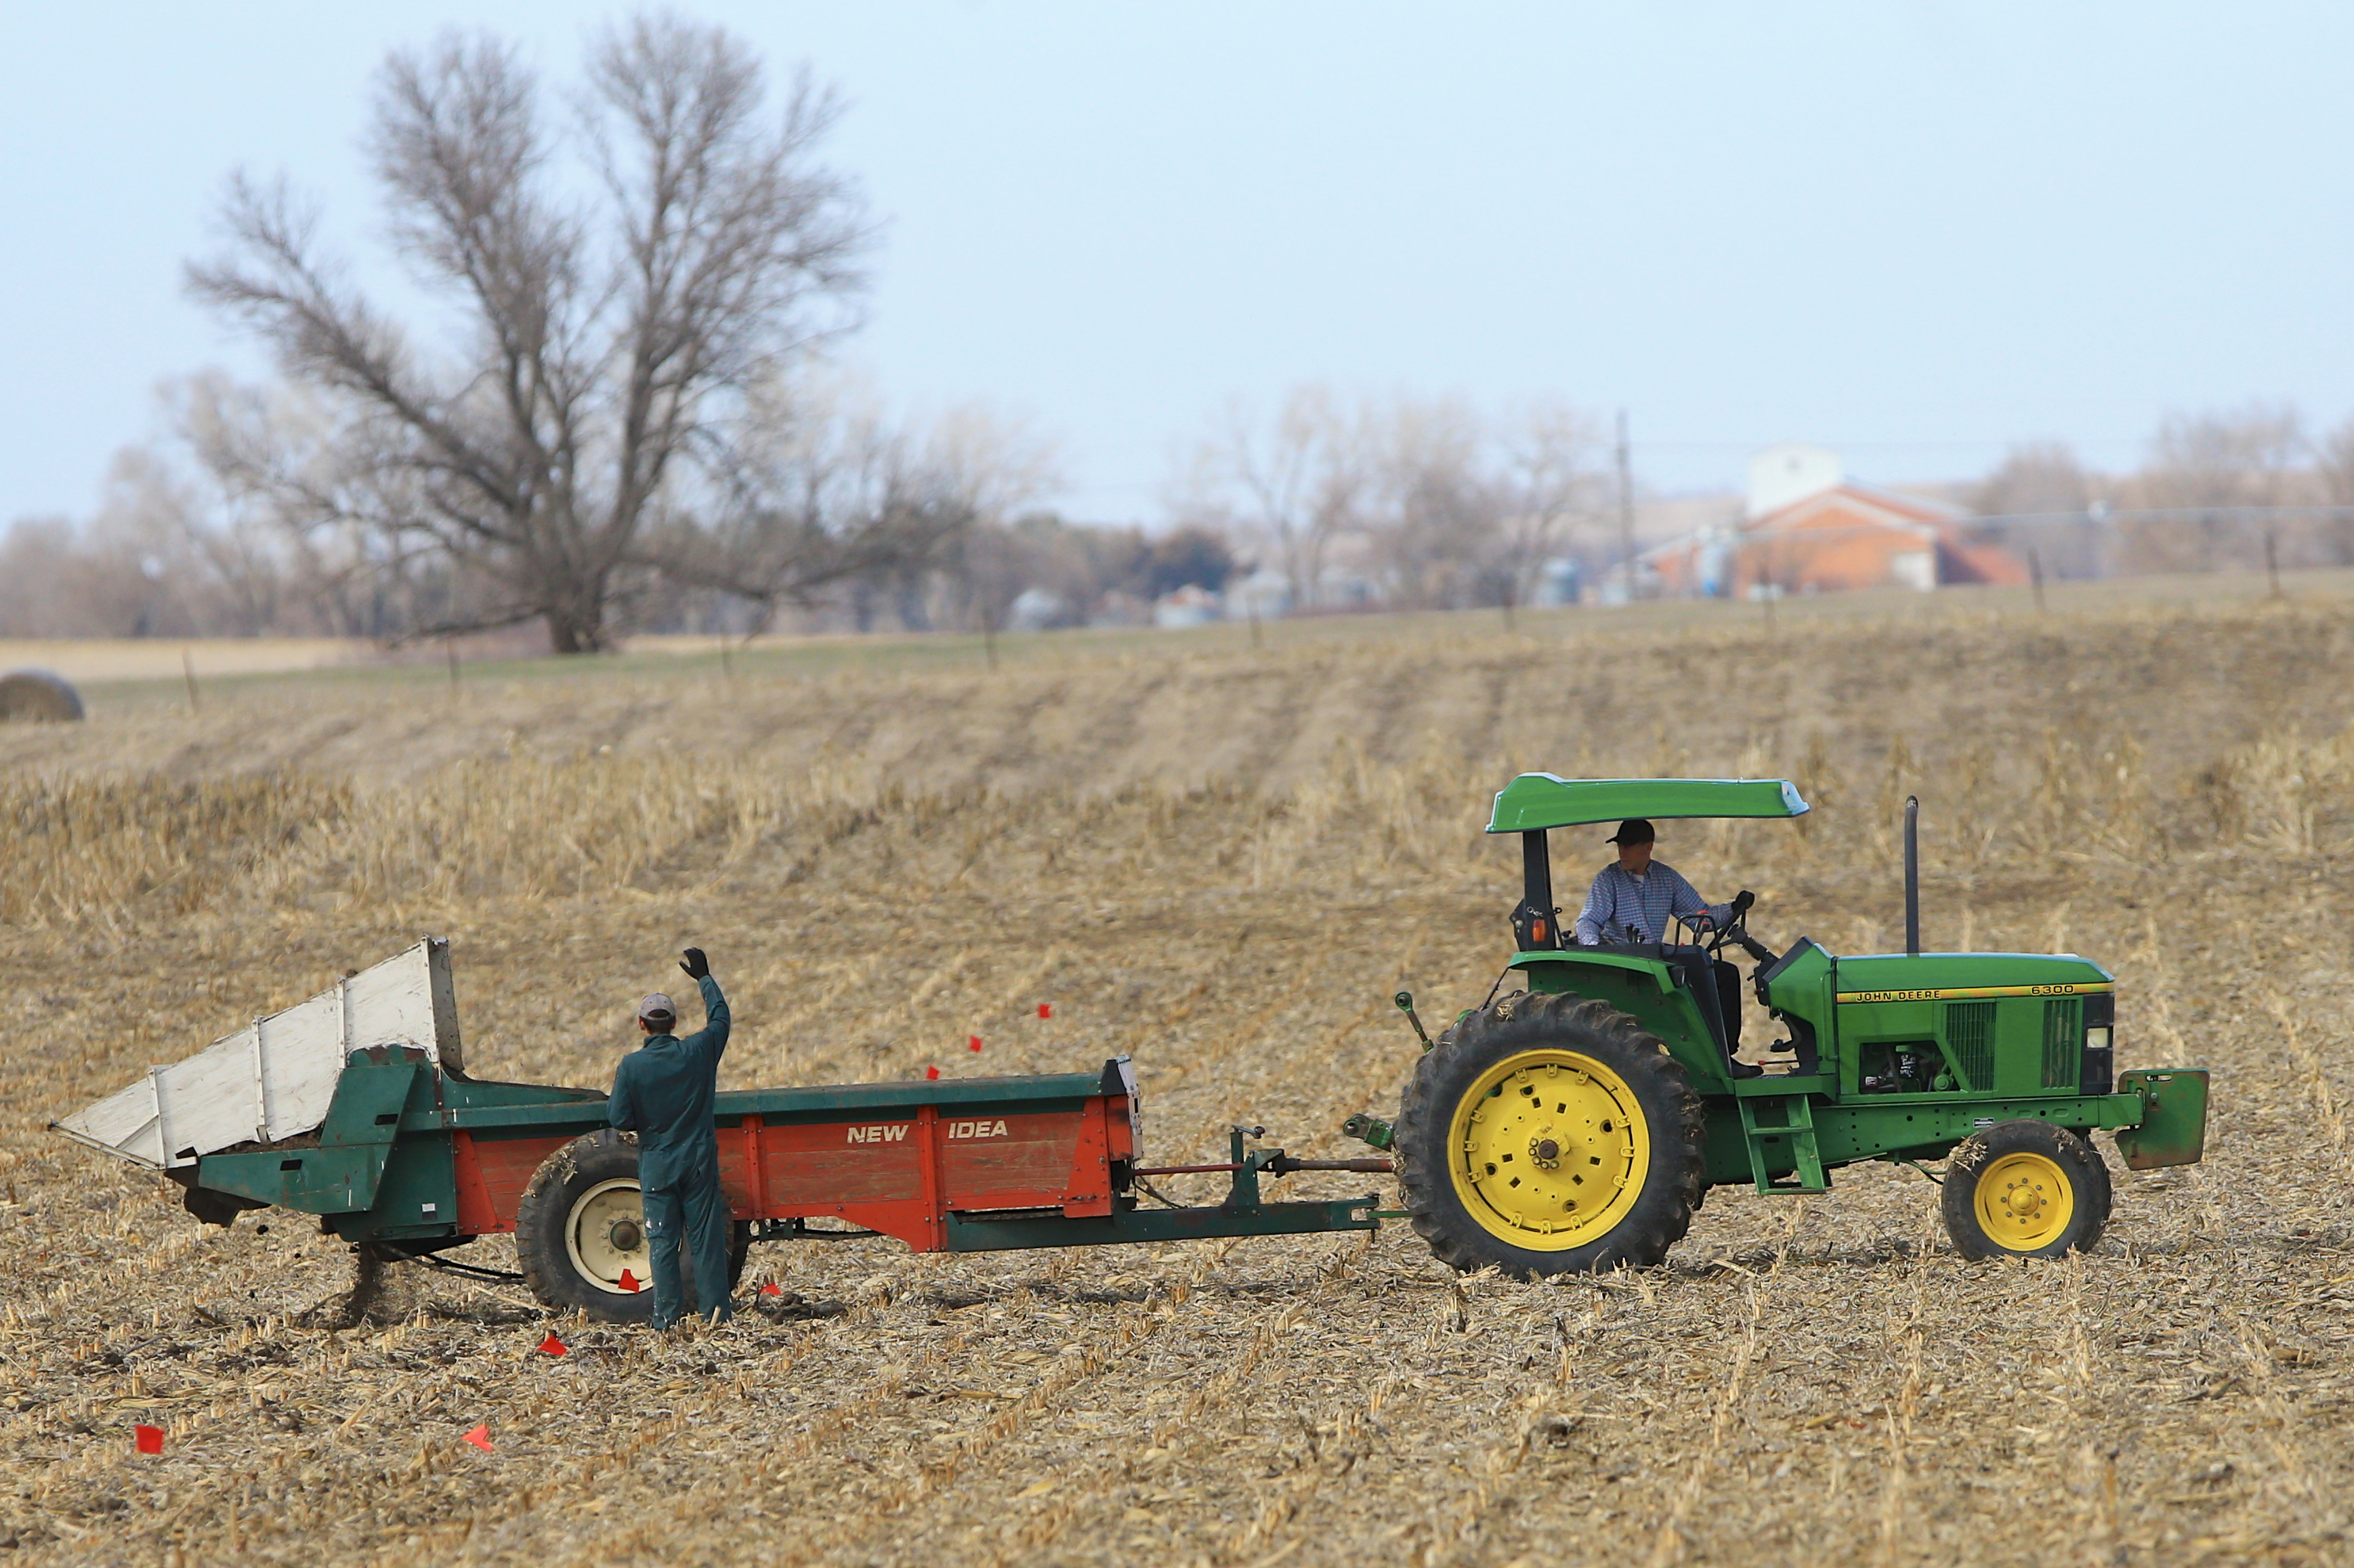 A man pulls a spreader with a green tractor in a yellow cornfield.